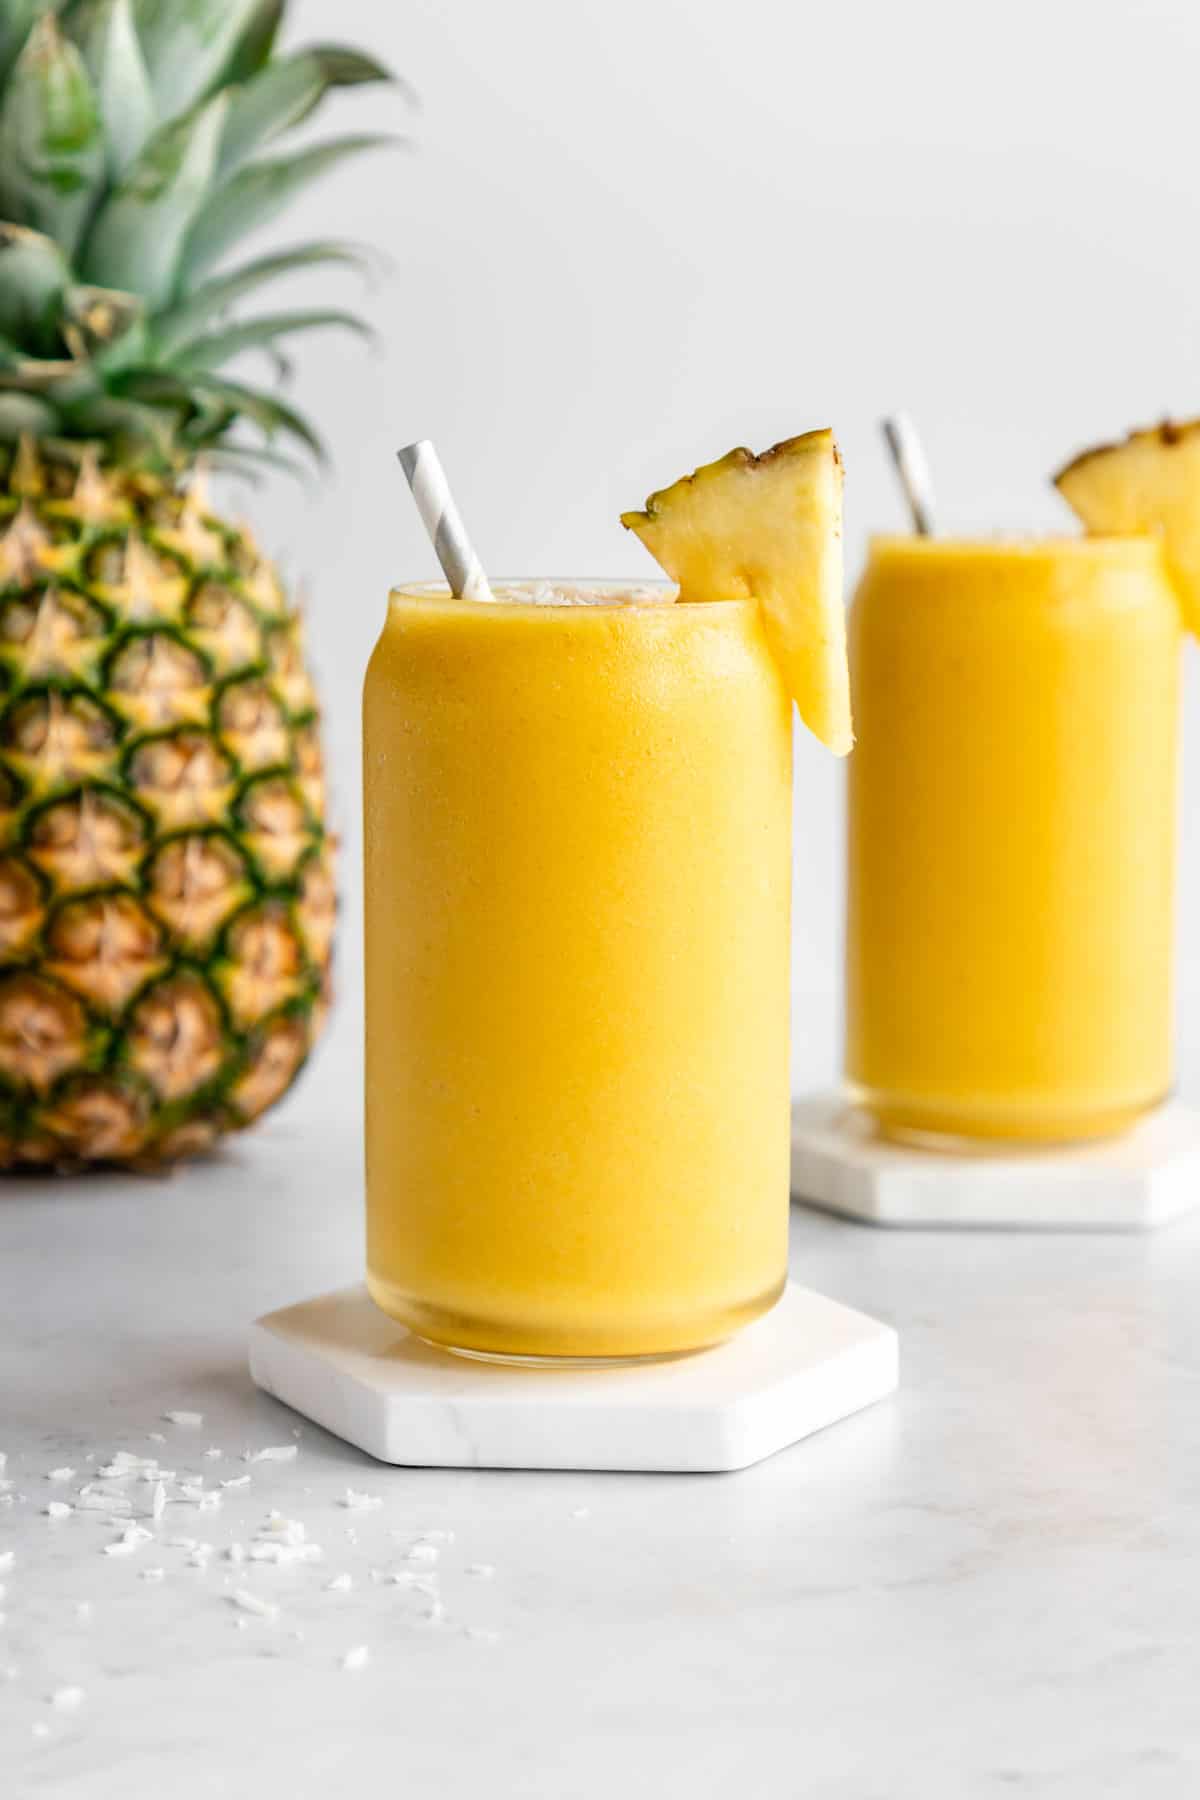 Pineapple Coconut Smoothie - Purely Kaylie